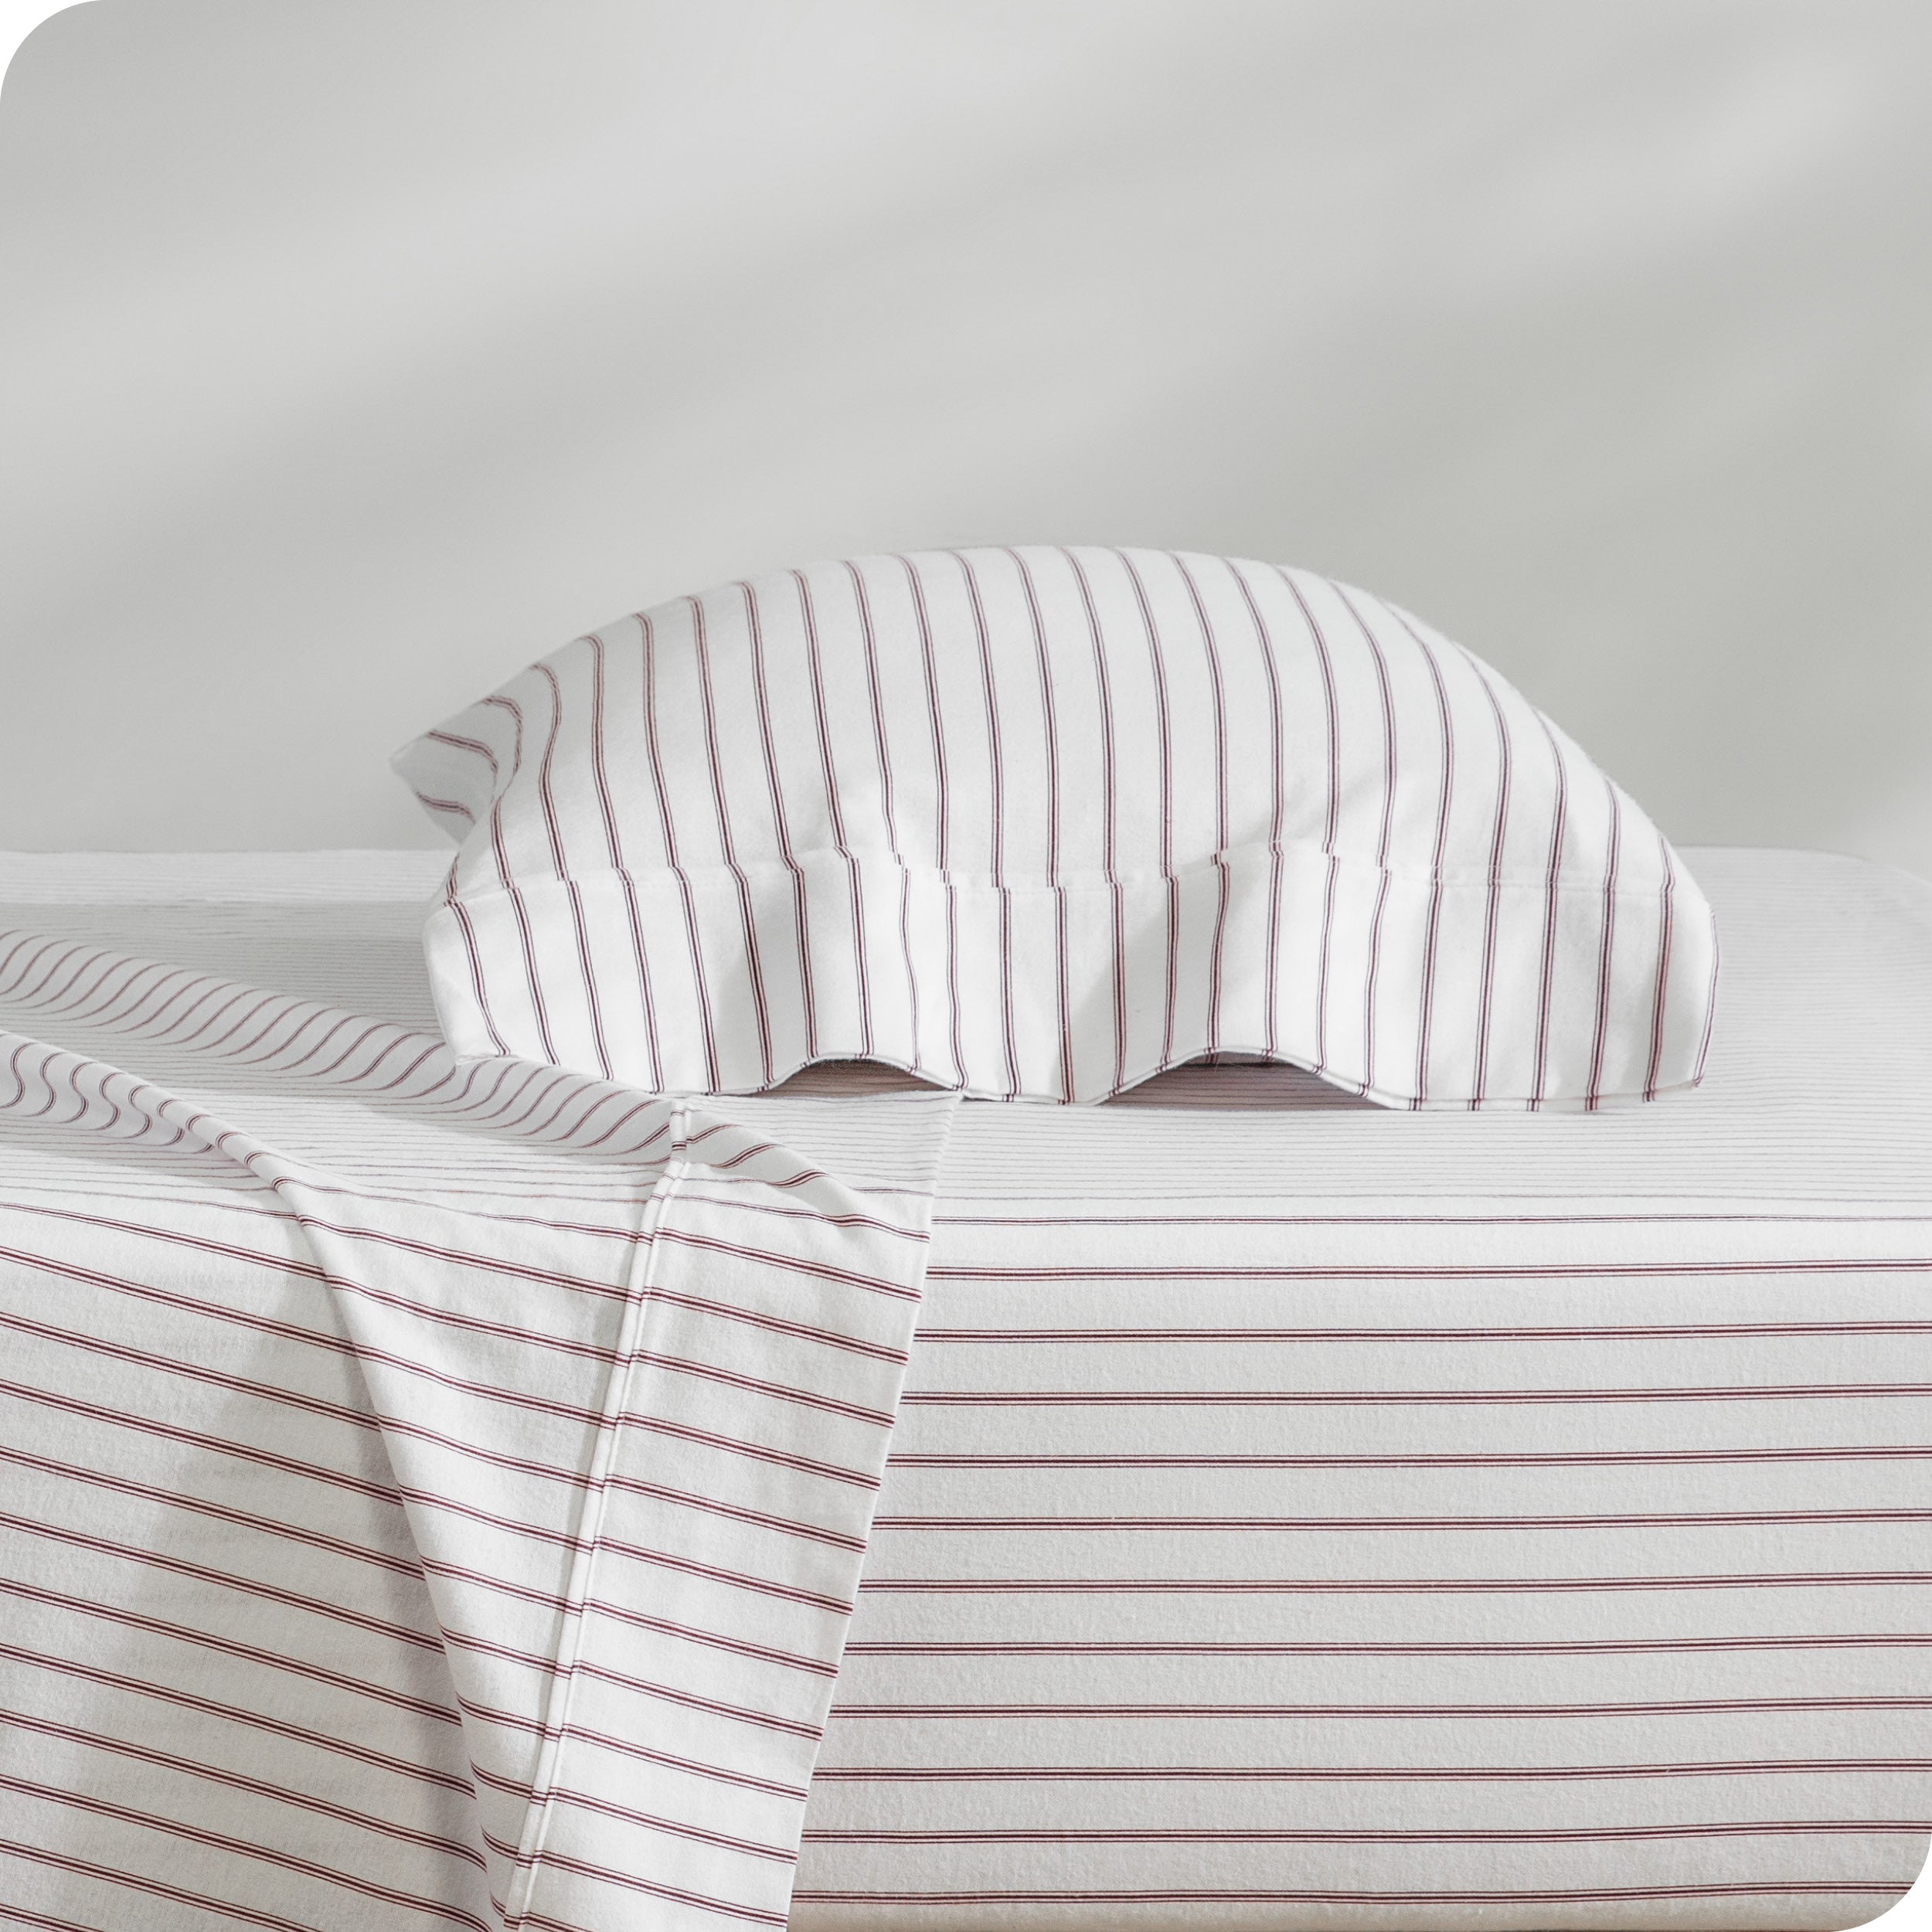 Flannel pillowcase with pillow inside stacked on a bed made with matching flannel sheets